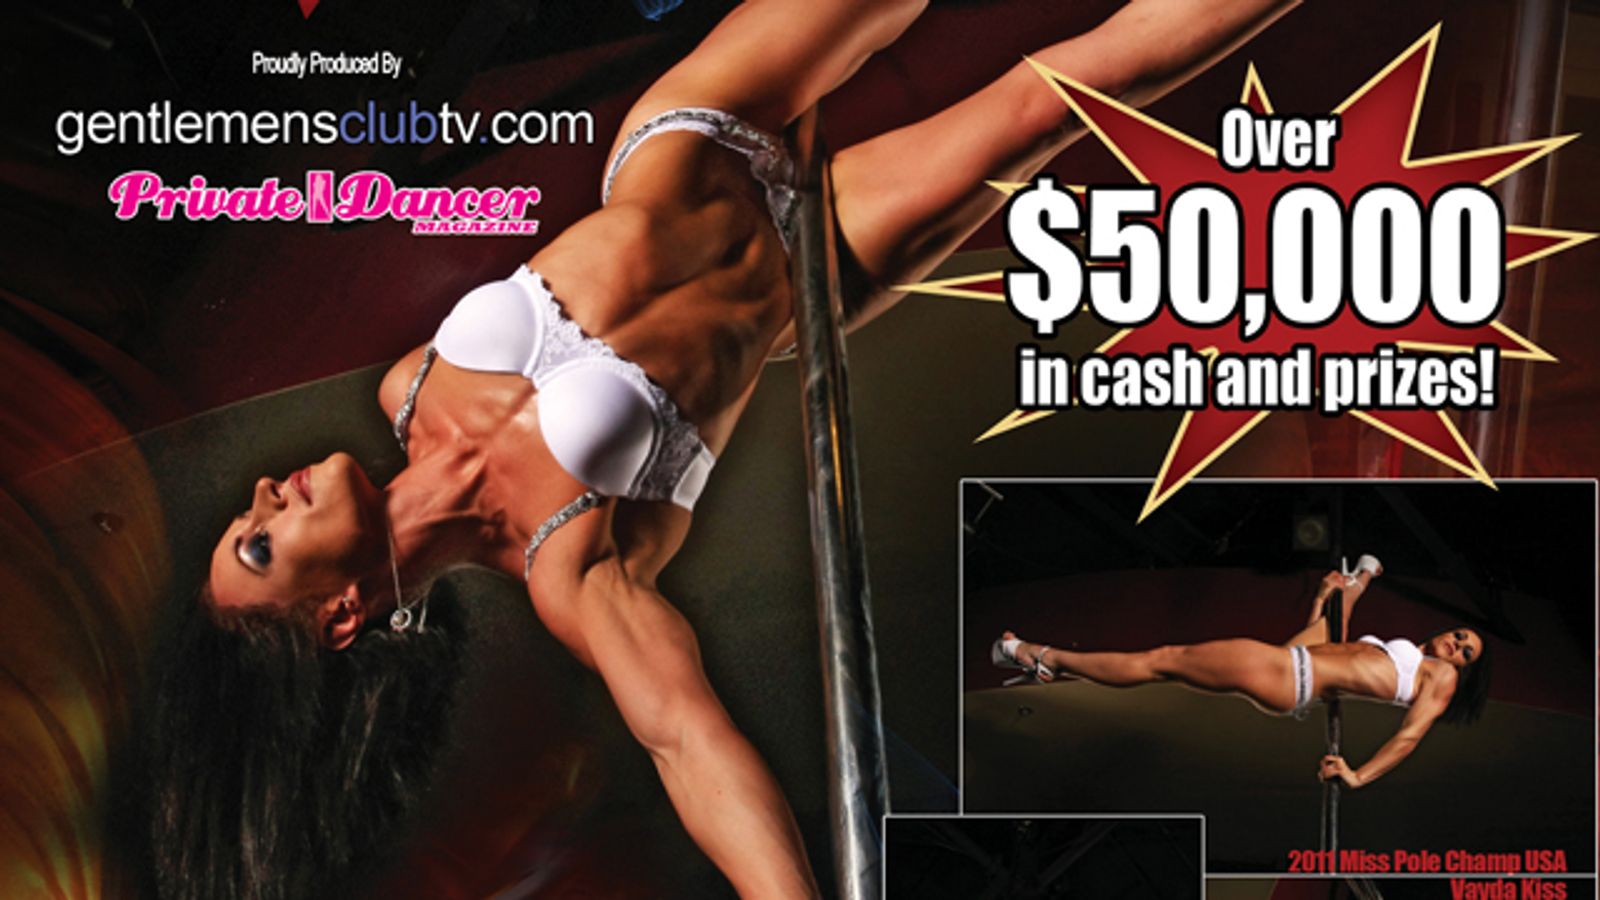 2012 Miss Pole Champ USA to be Streamed Live PPV Event